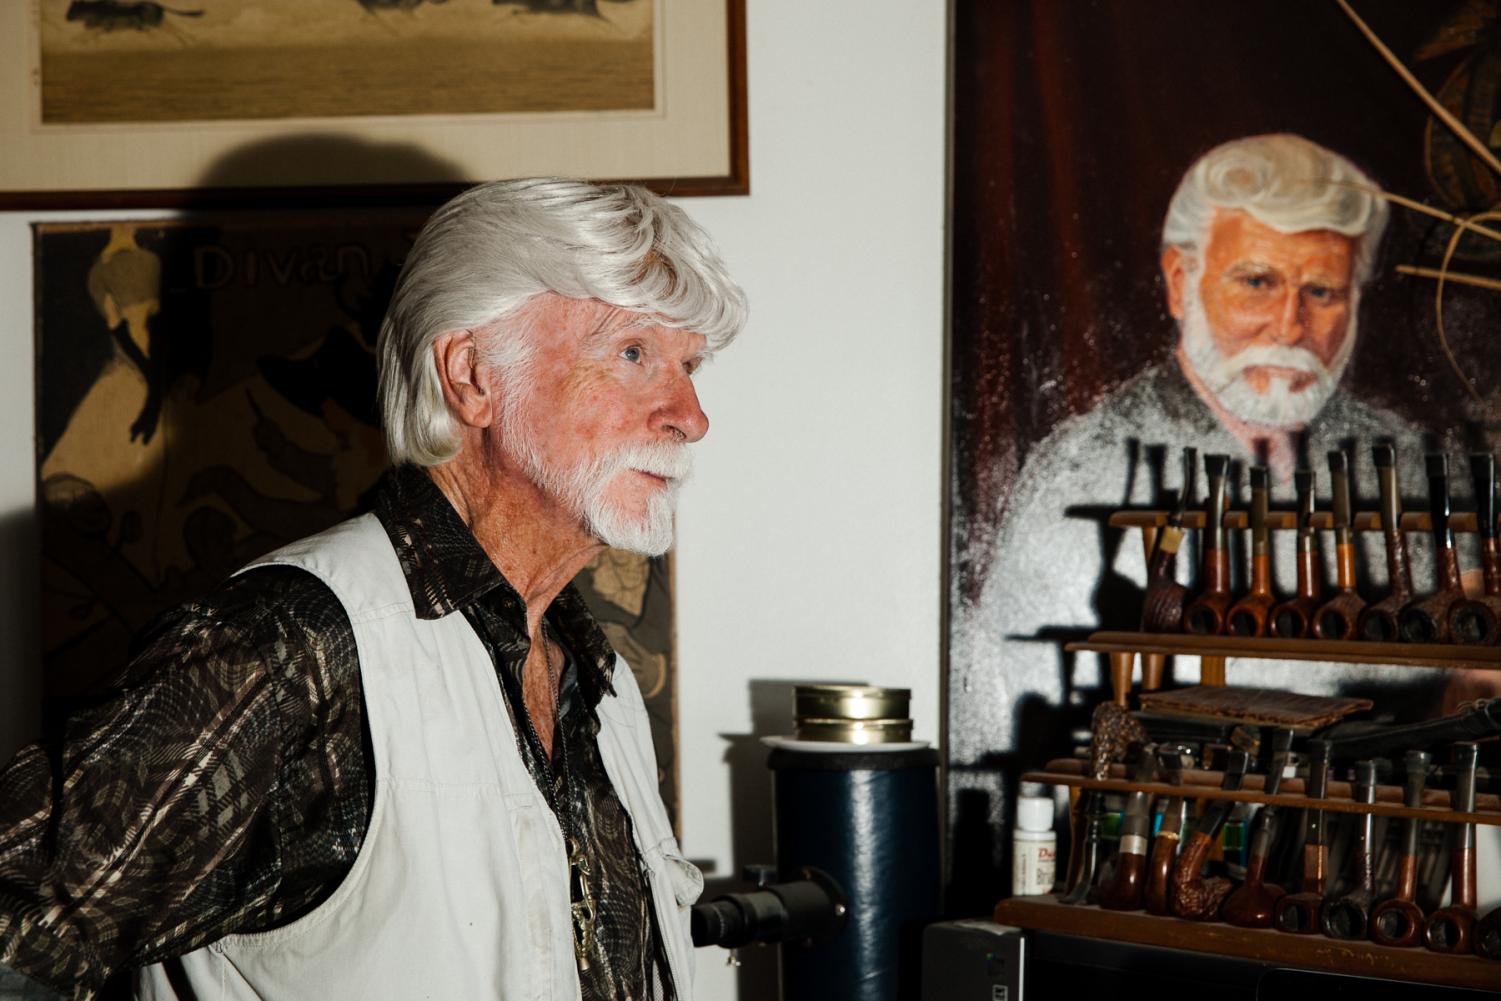 Ron Atwood stands in his home office with a portion of his antique tobacco pipe collection and a self portrait painting from 1998 done by a friend.